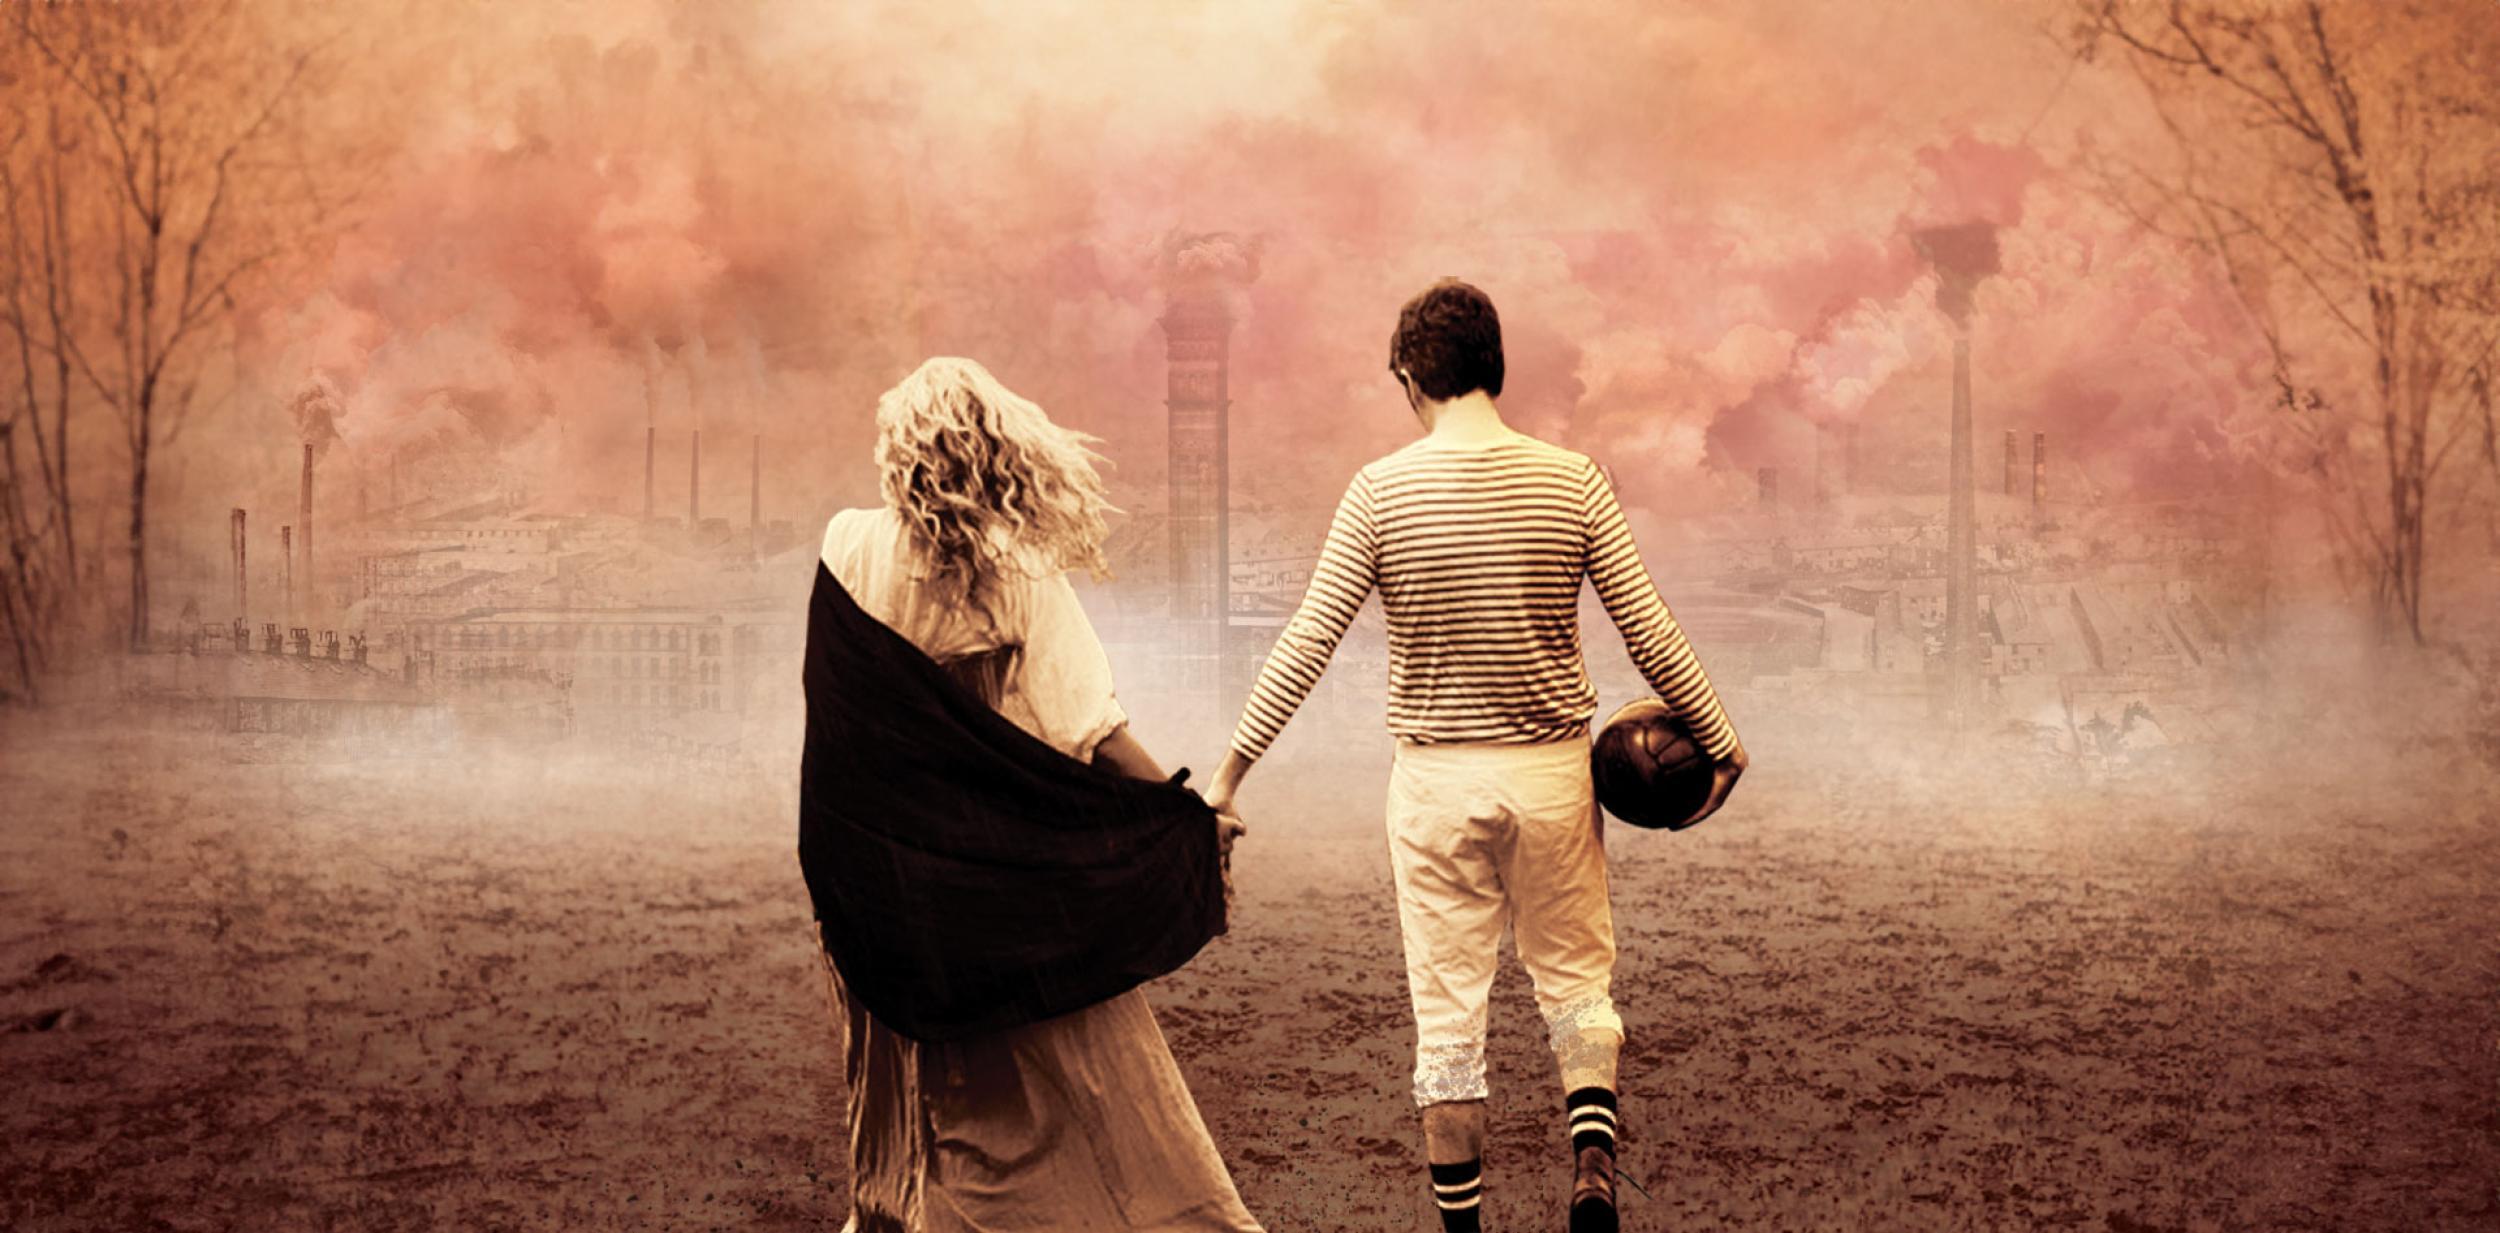 Two people holding hands and walking towards an industrial city